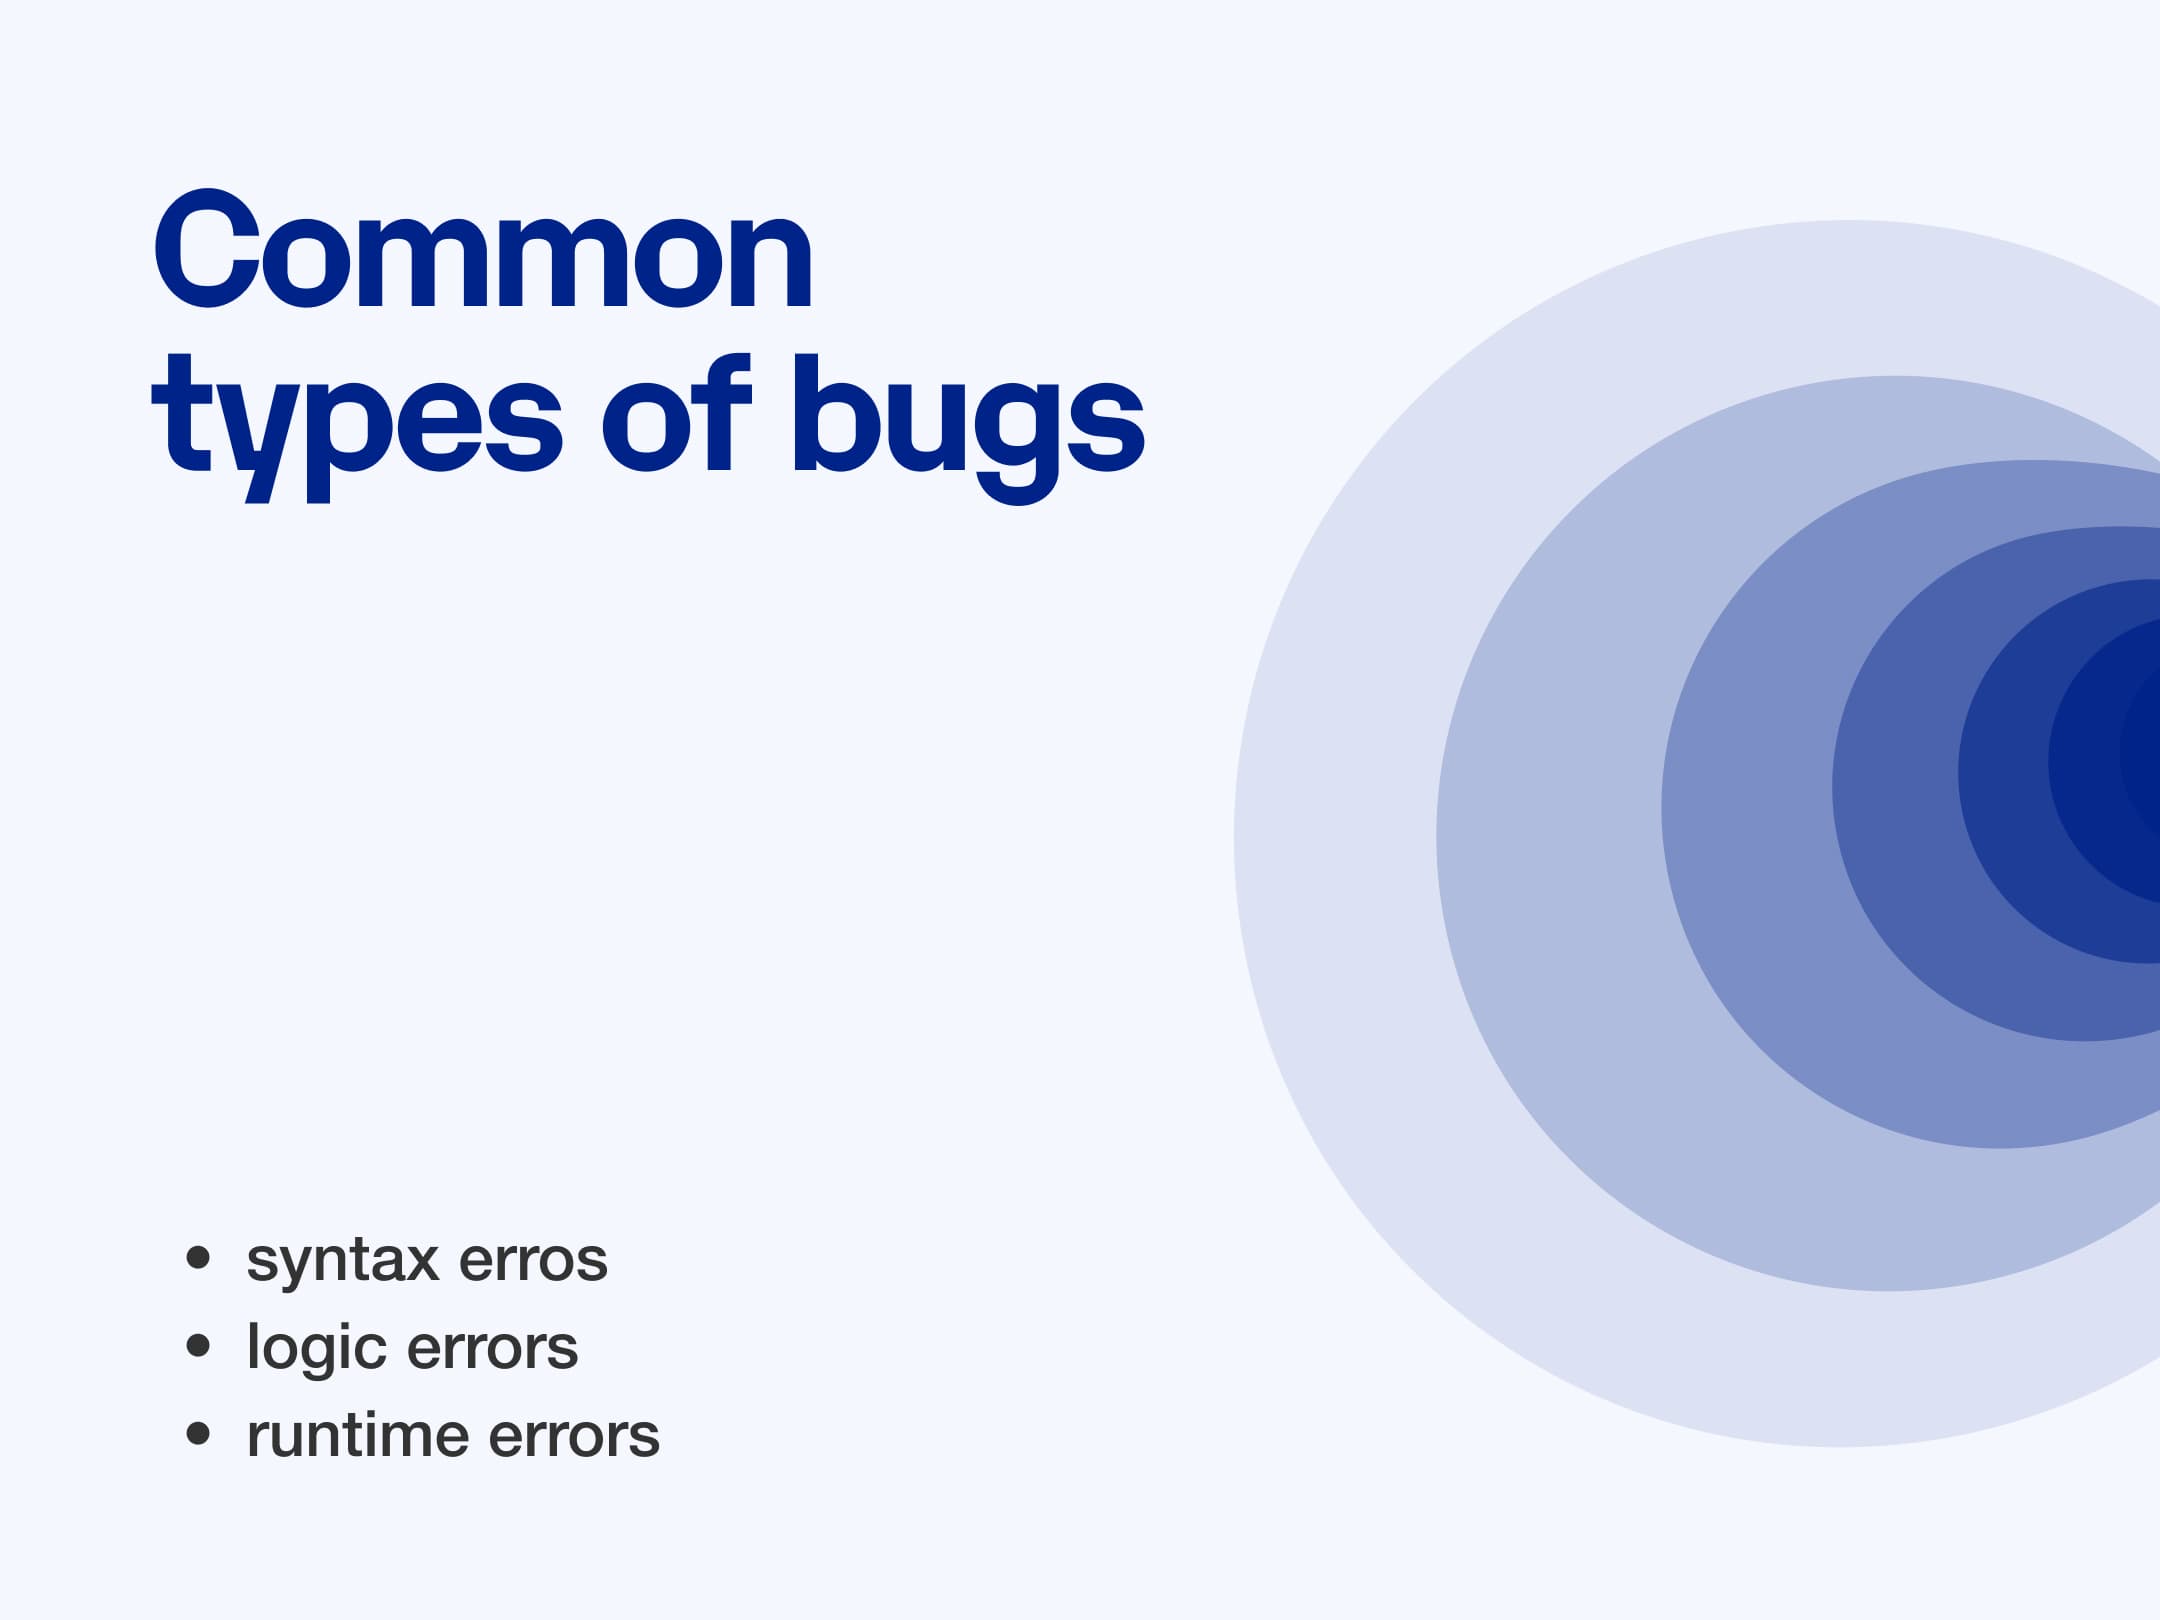 The Common Types of Bugs.